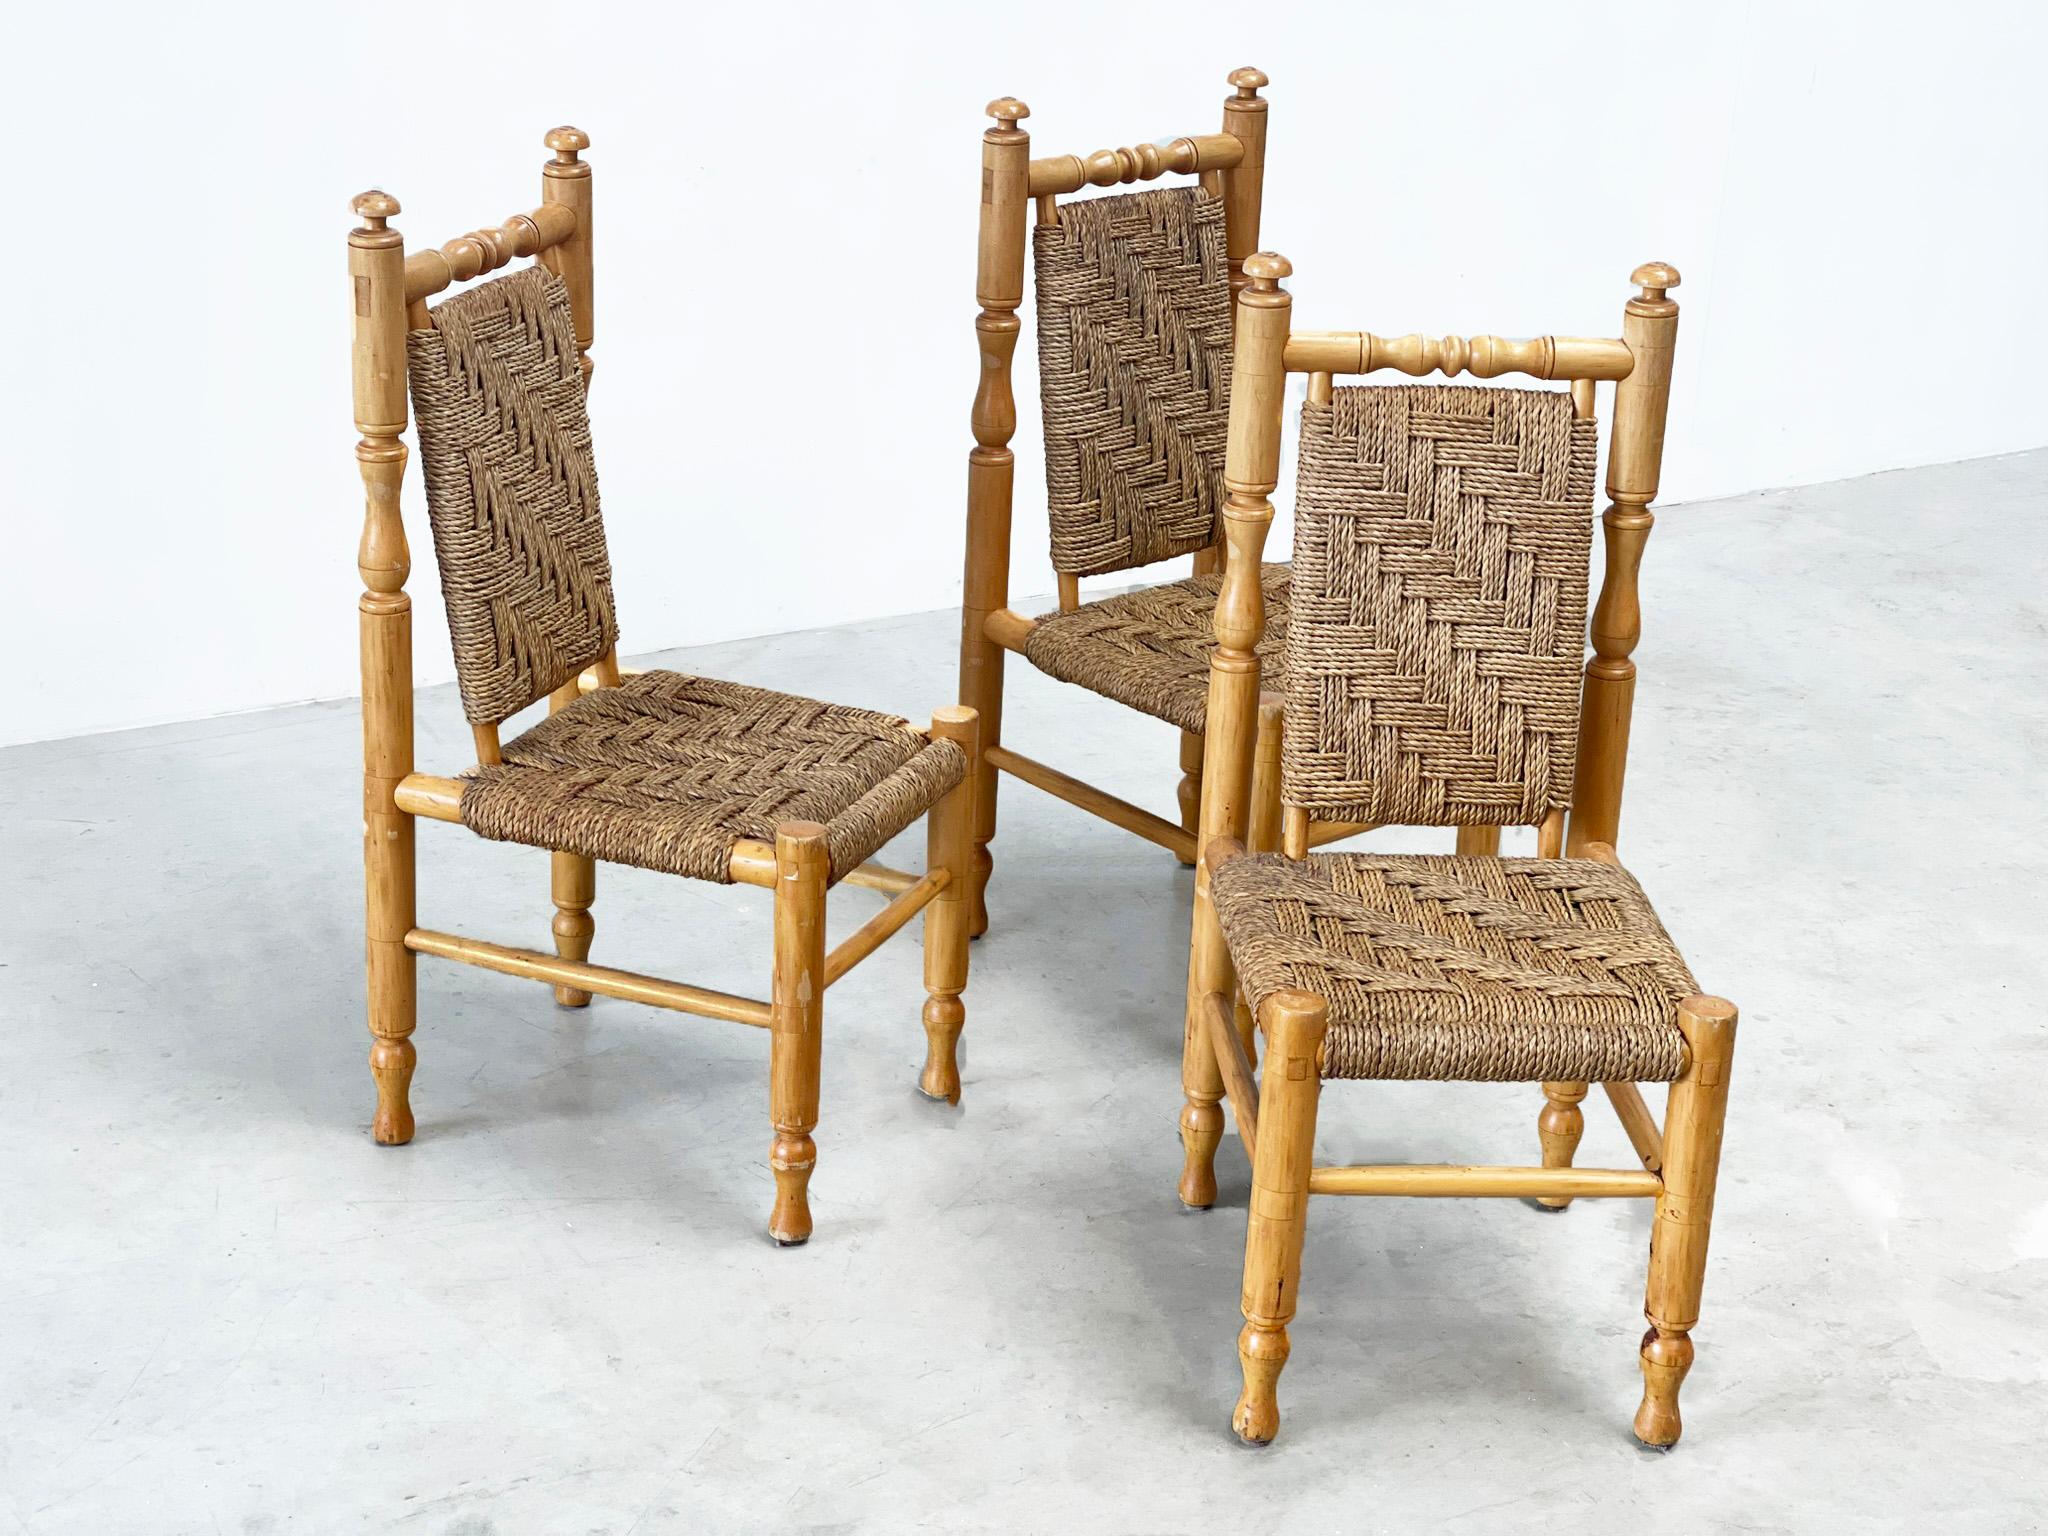 Rattan set of 3 sidechairs / dining chairs by by Adrien Audoux & Frida Minet For Sale